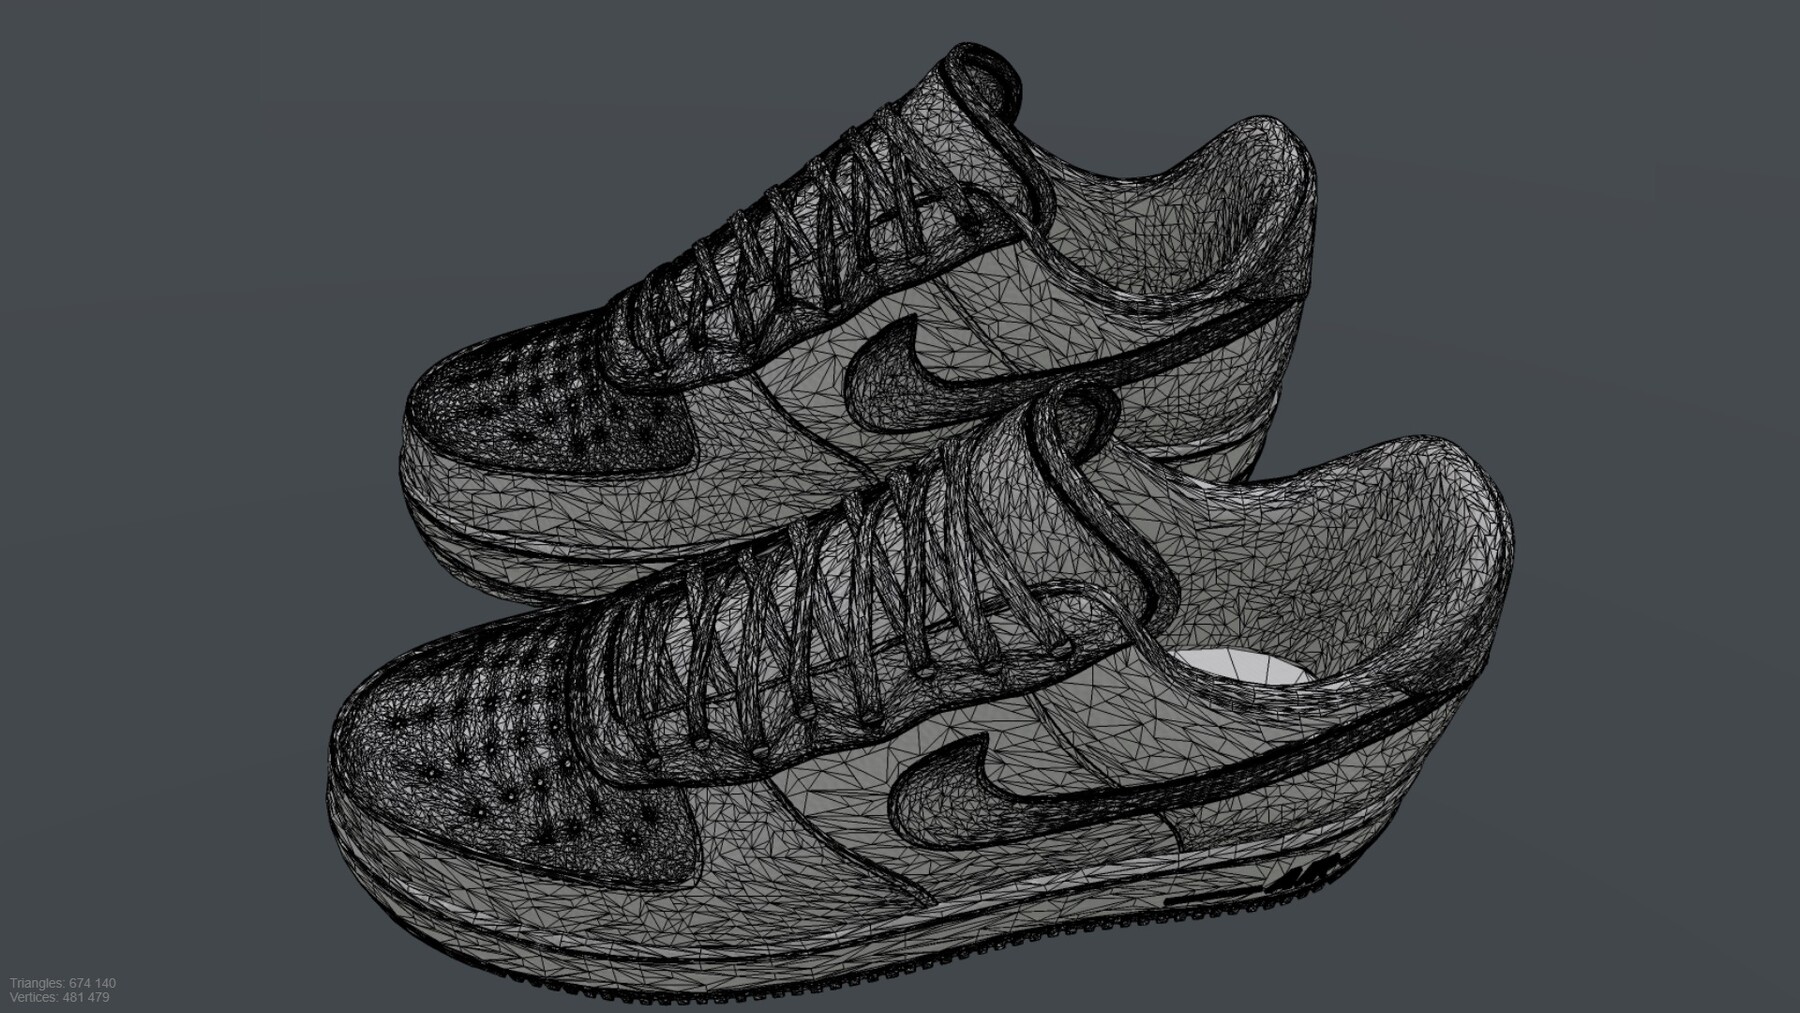 ArtStation - NIKE AIR FORCE 1 SHOES low-poly PBR